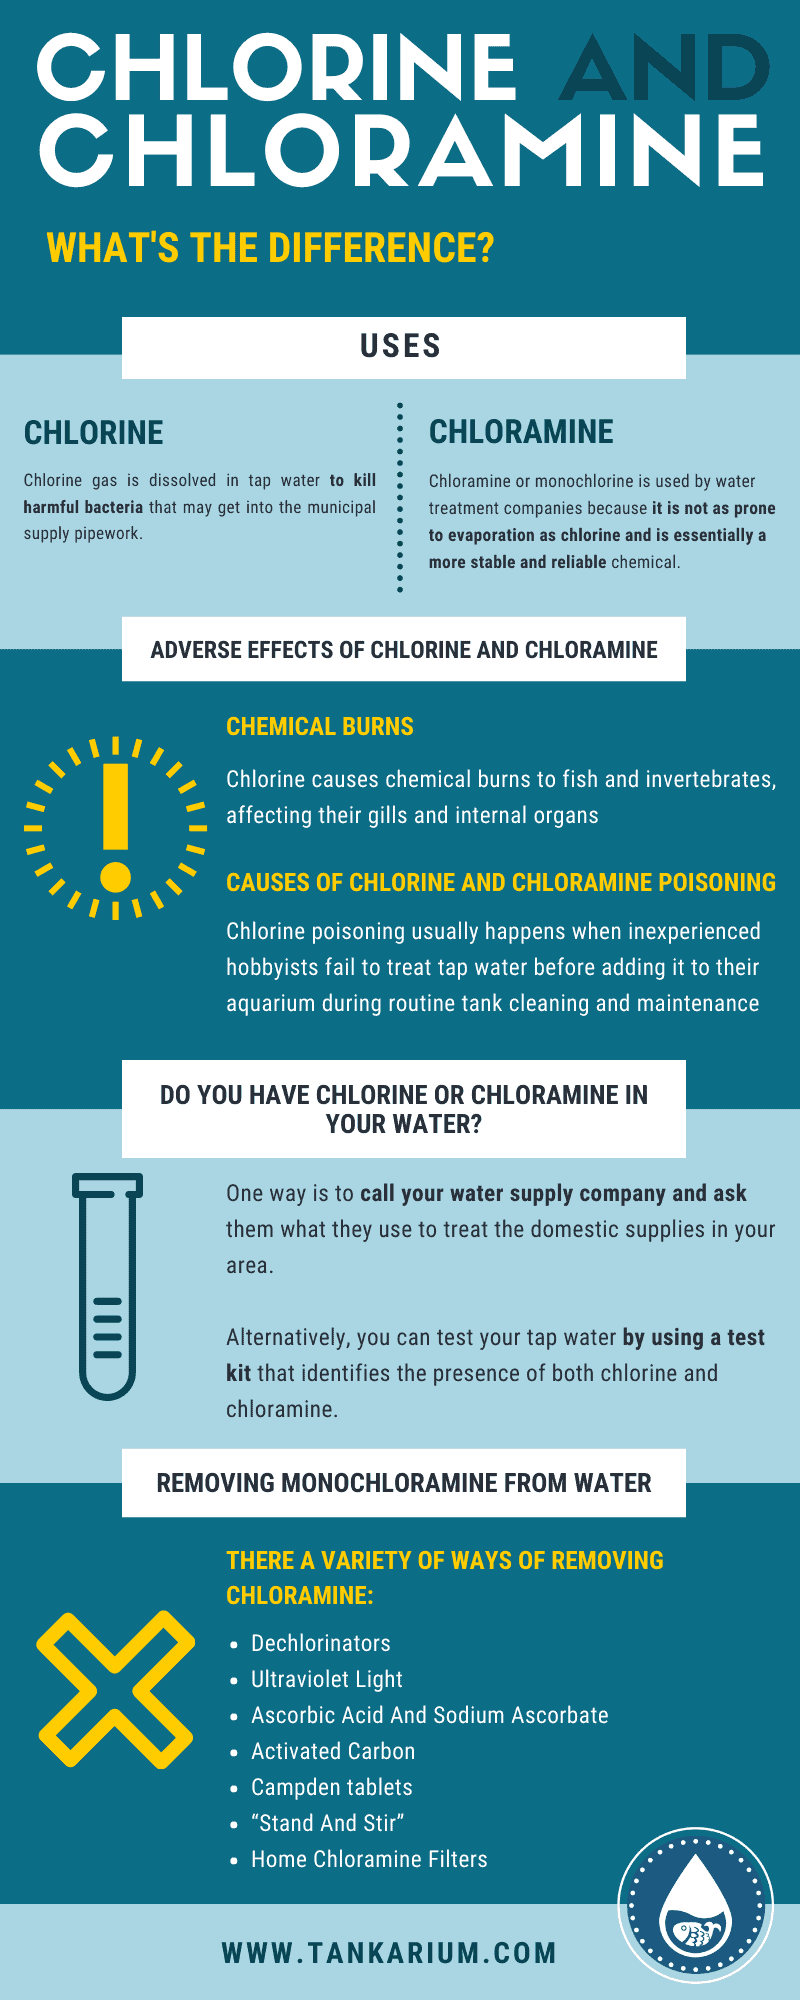 Chlorine And Chloramine - What’s The Difference-infographic